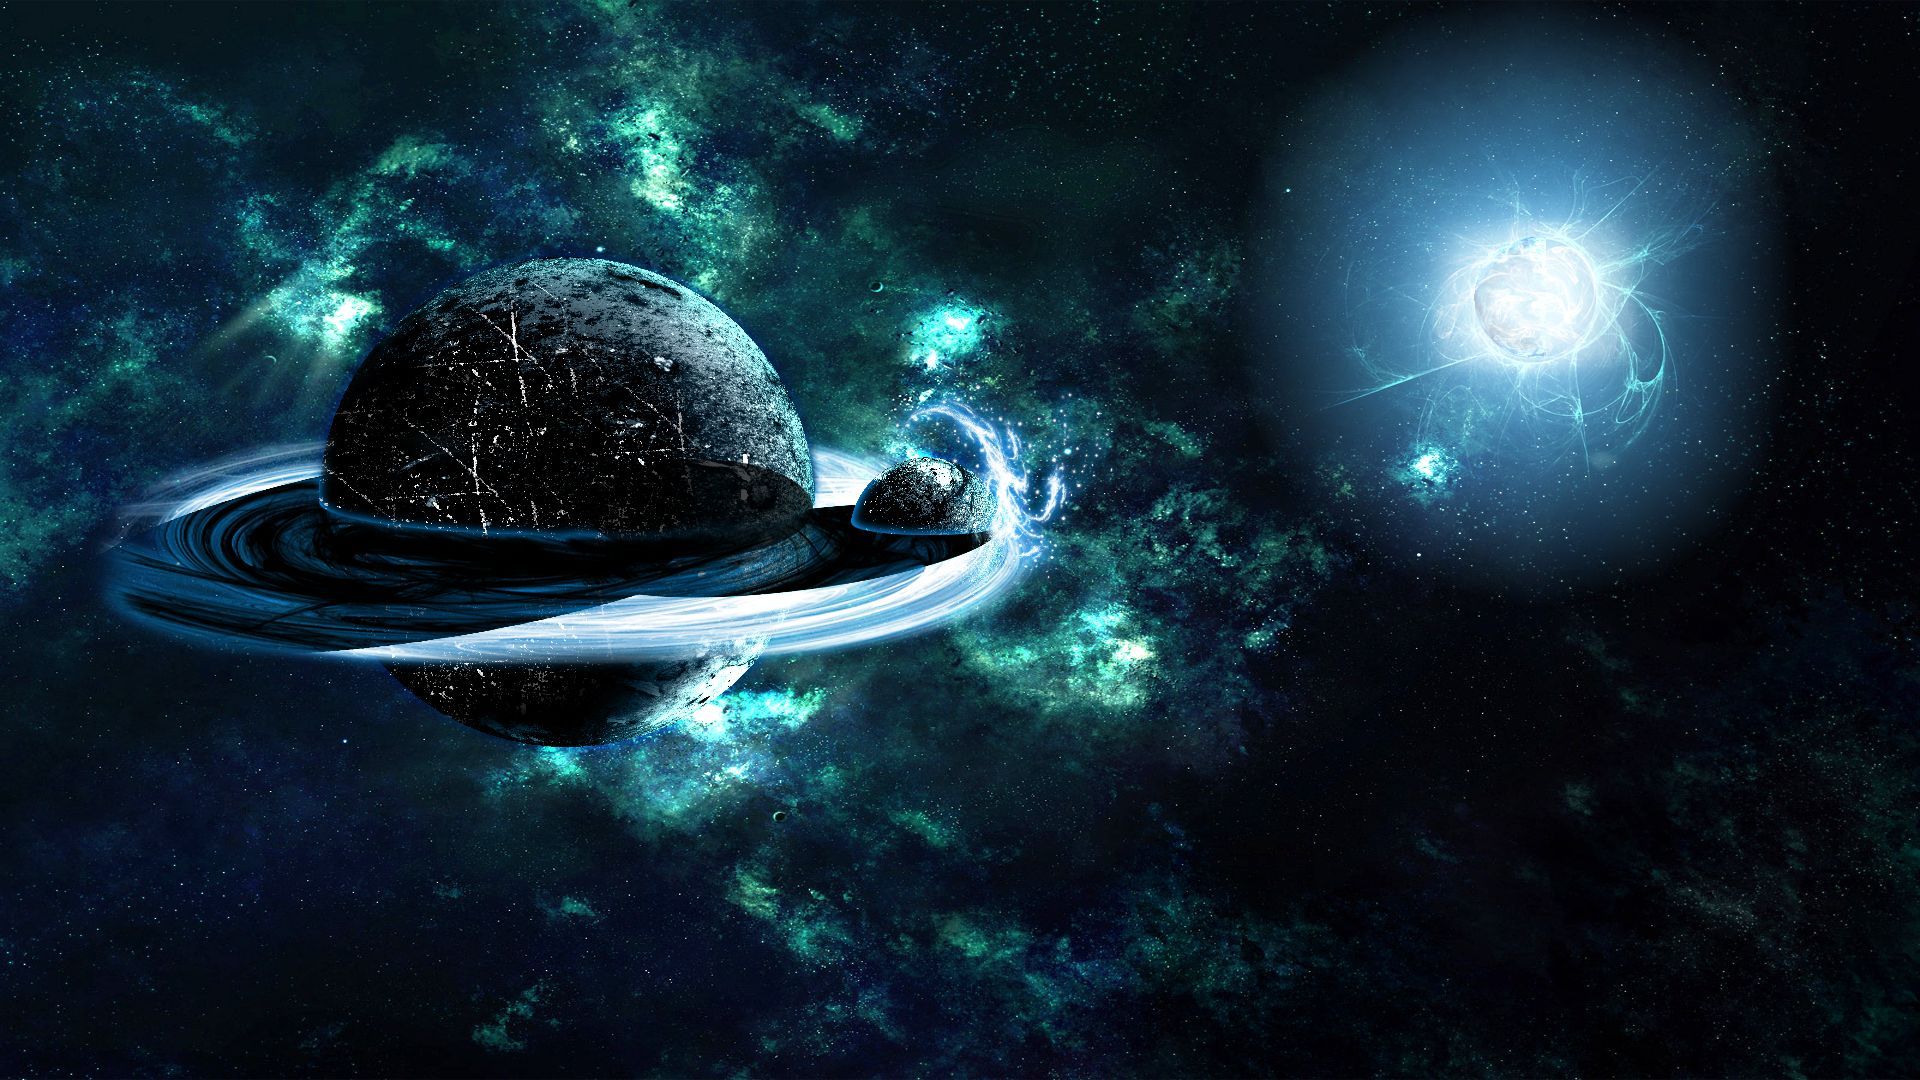 Z10 HD Space Wallpaper. Awesome Space